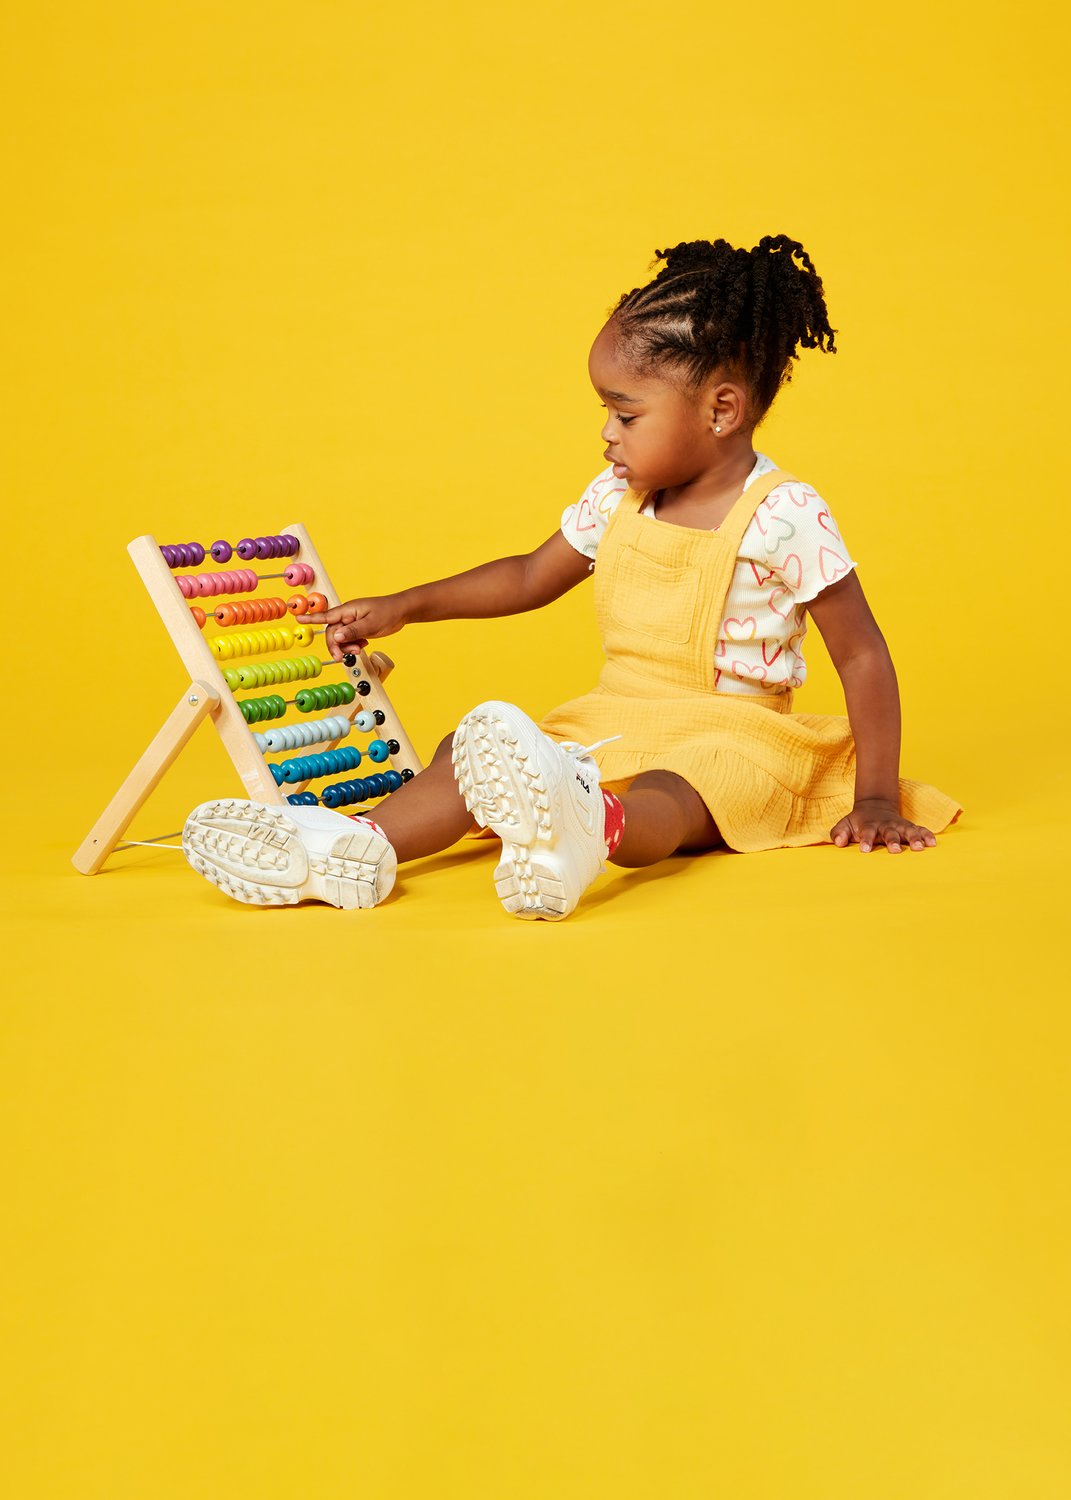 Child and abacus